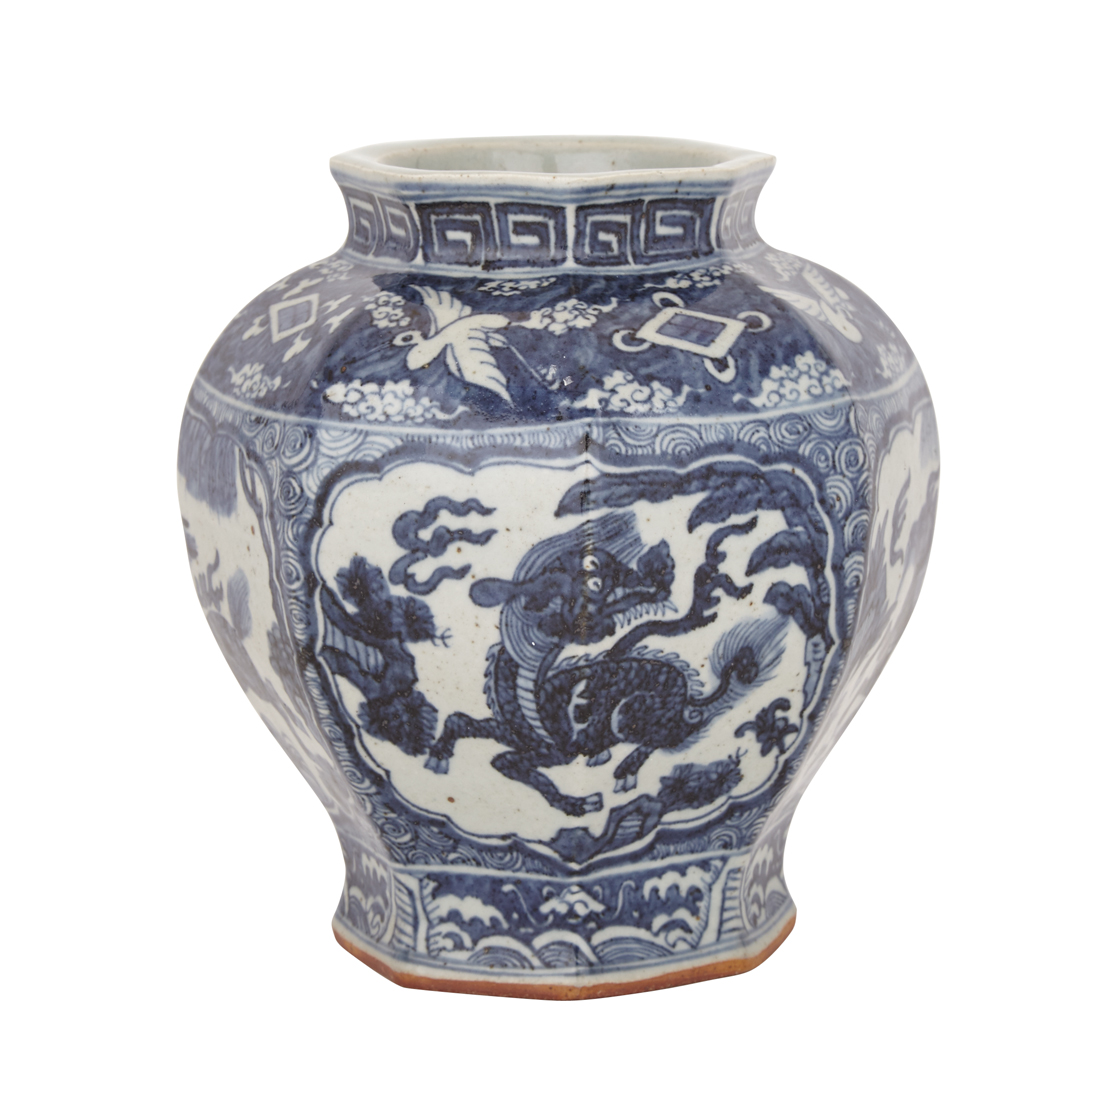 Octagonal Blue and White Vase, Ming Dynasty or Later